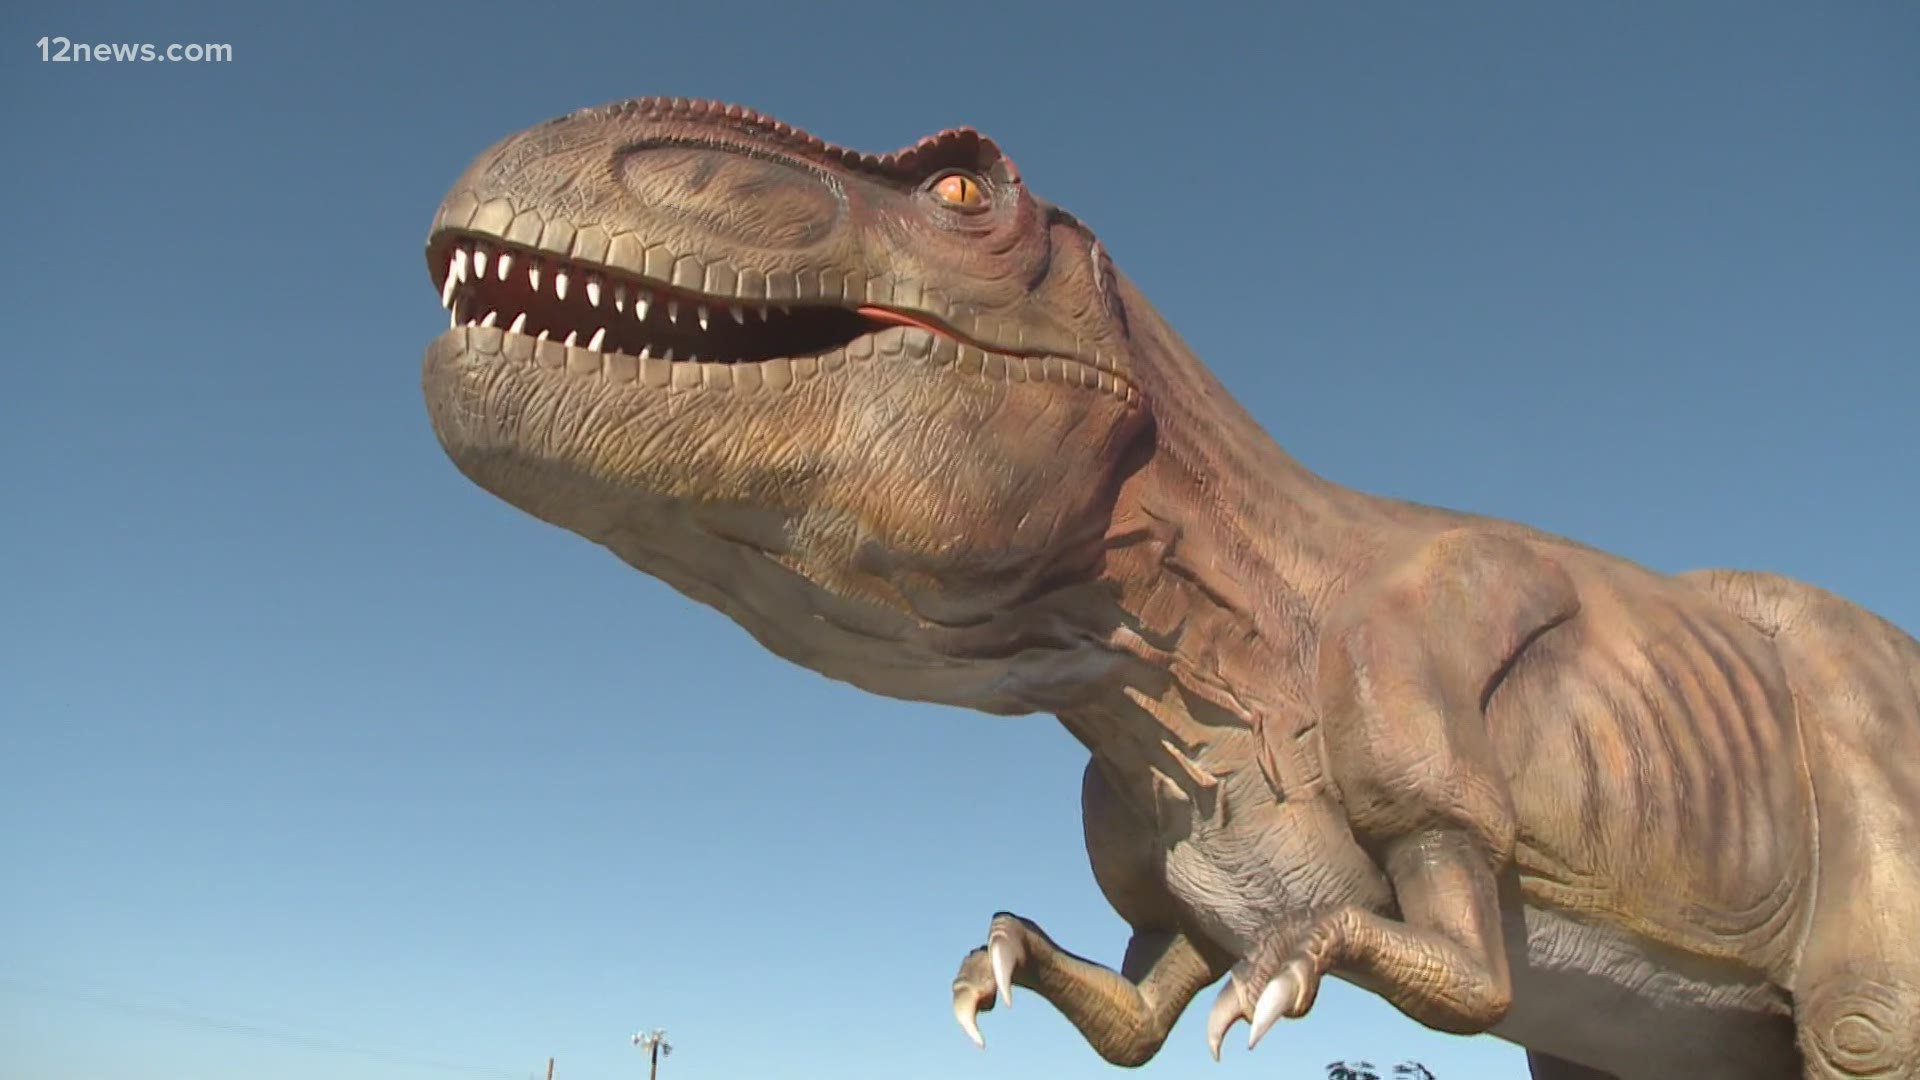 If you're looking for something fun to do this weekend, now's your chance to experience a prehistoric safari with a life-sized T-Rex and raptors!